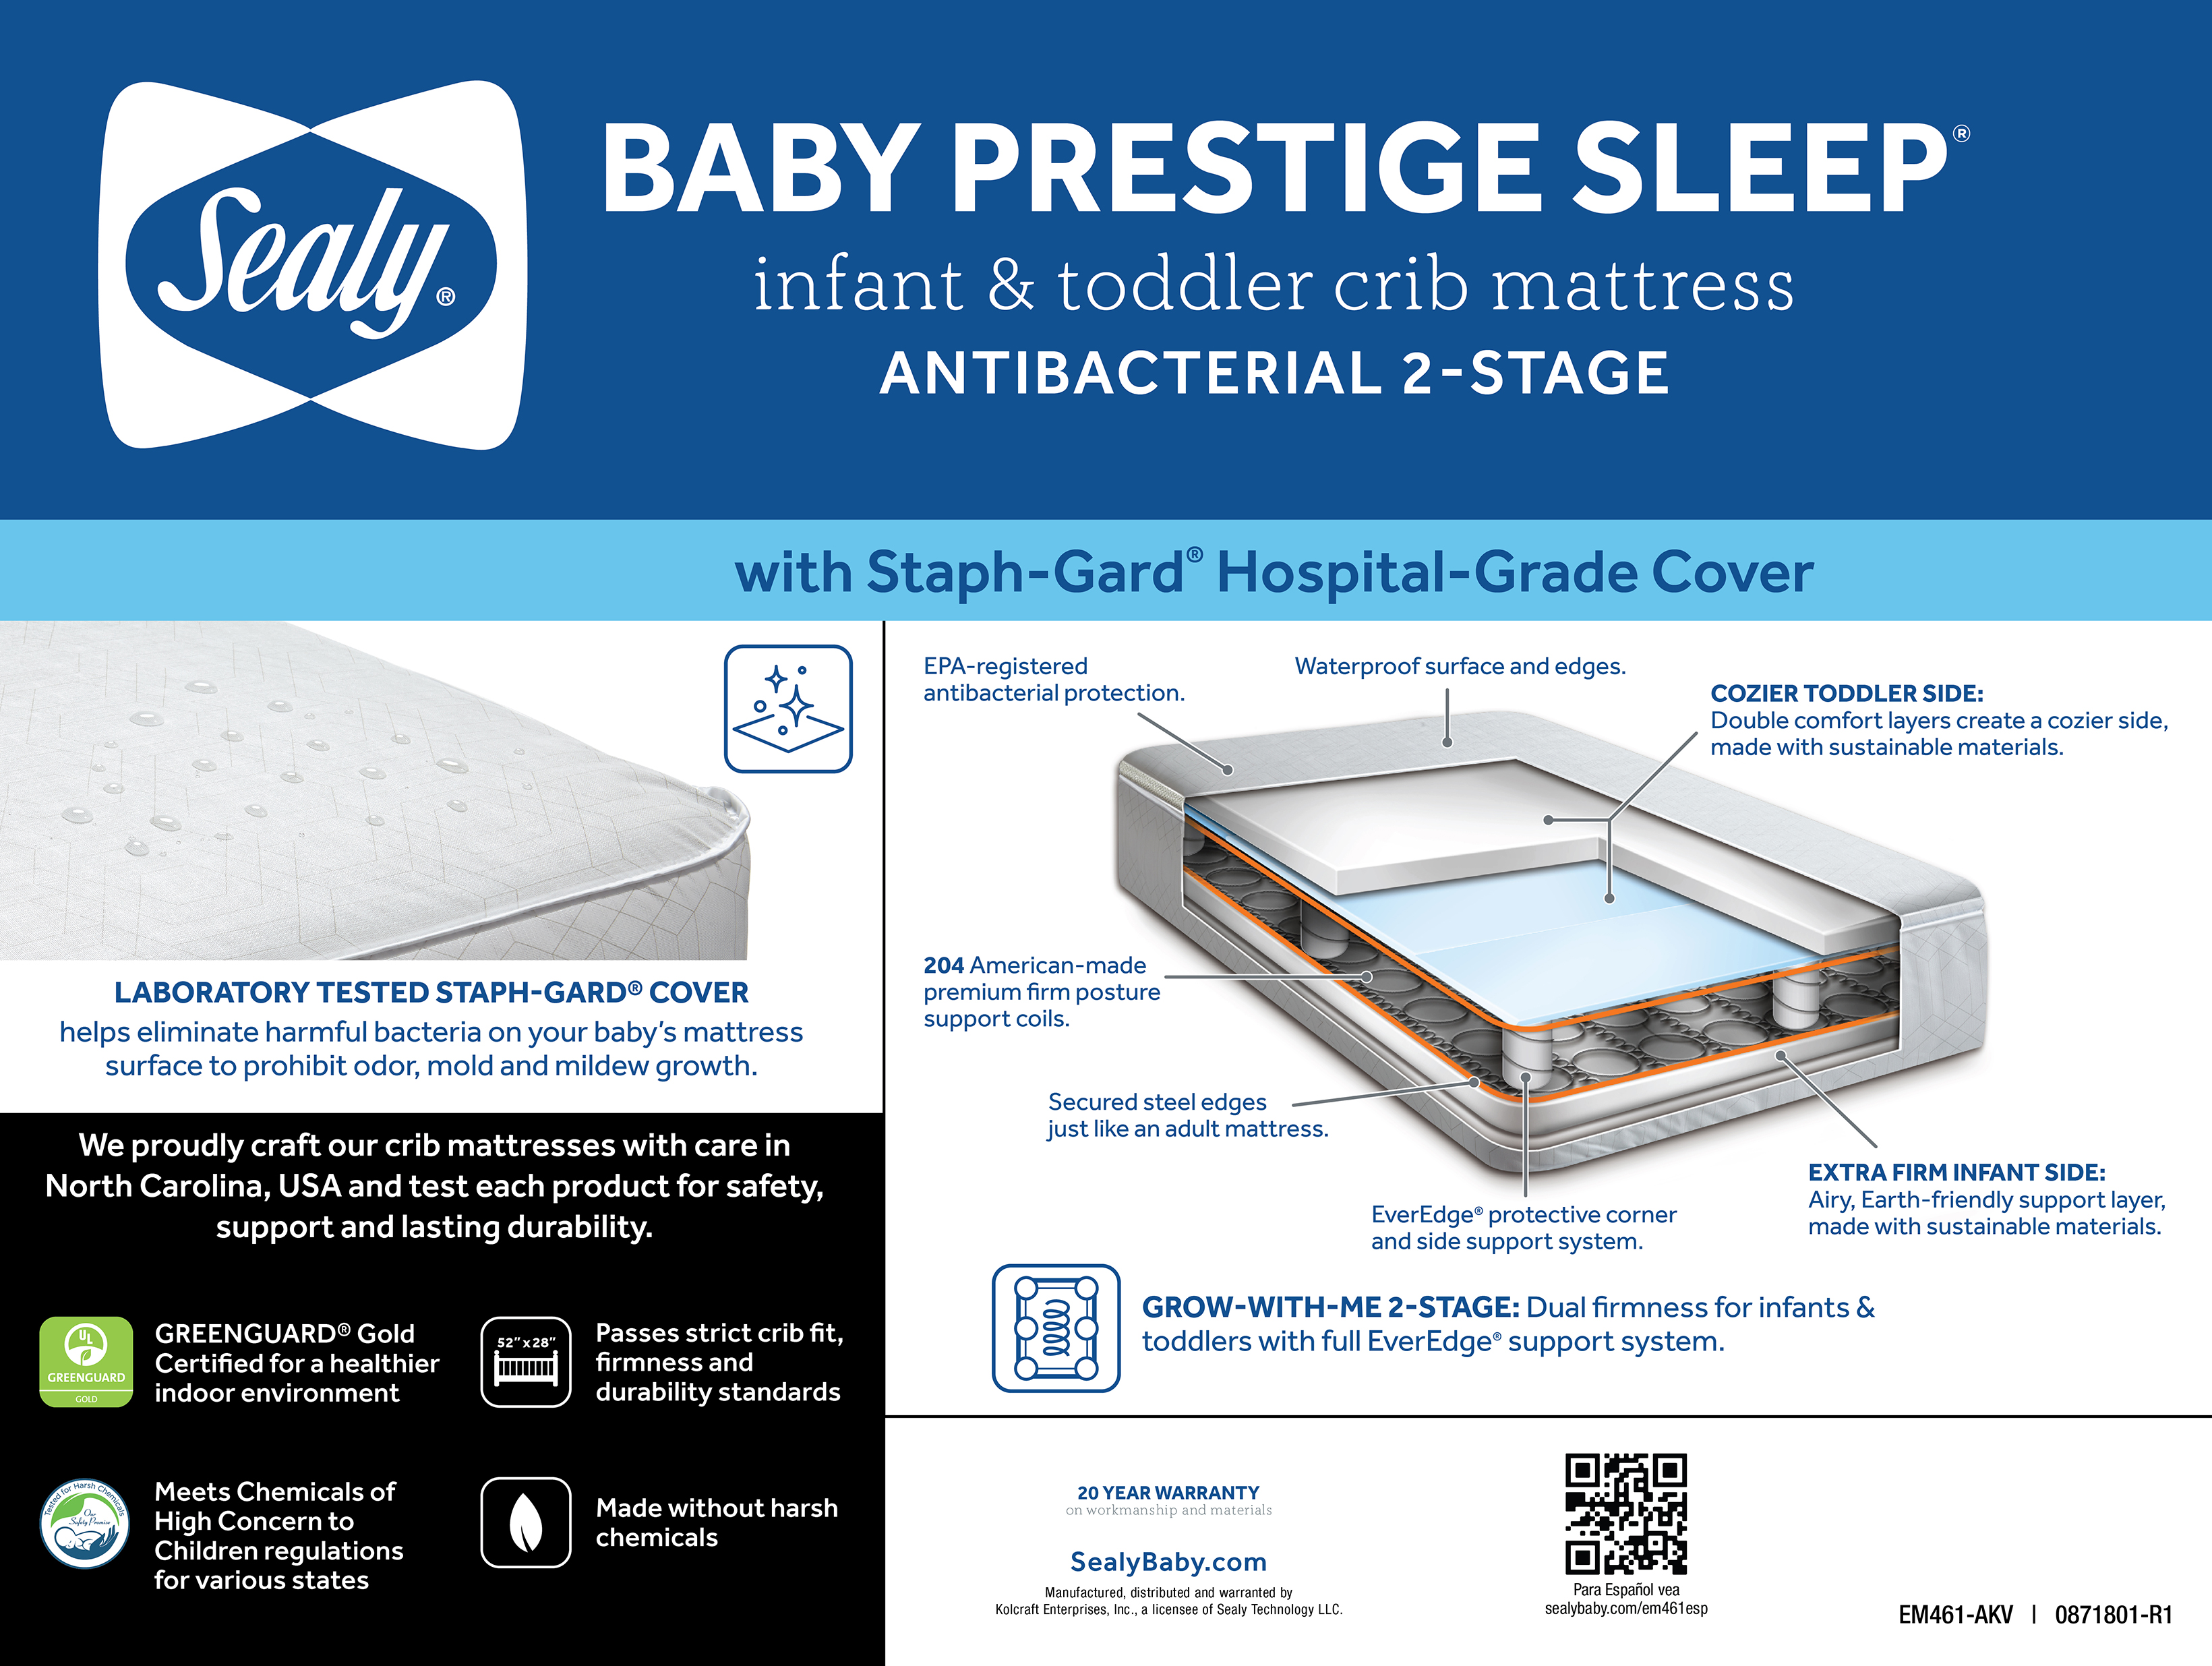 Sealy Baby Prestige Sleep Ultra-Premium 2-Stage Antibacterial, 204 Coil, Baby Crib & Toddler Mattress - image 4 of 16